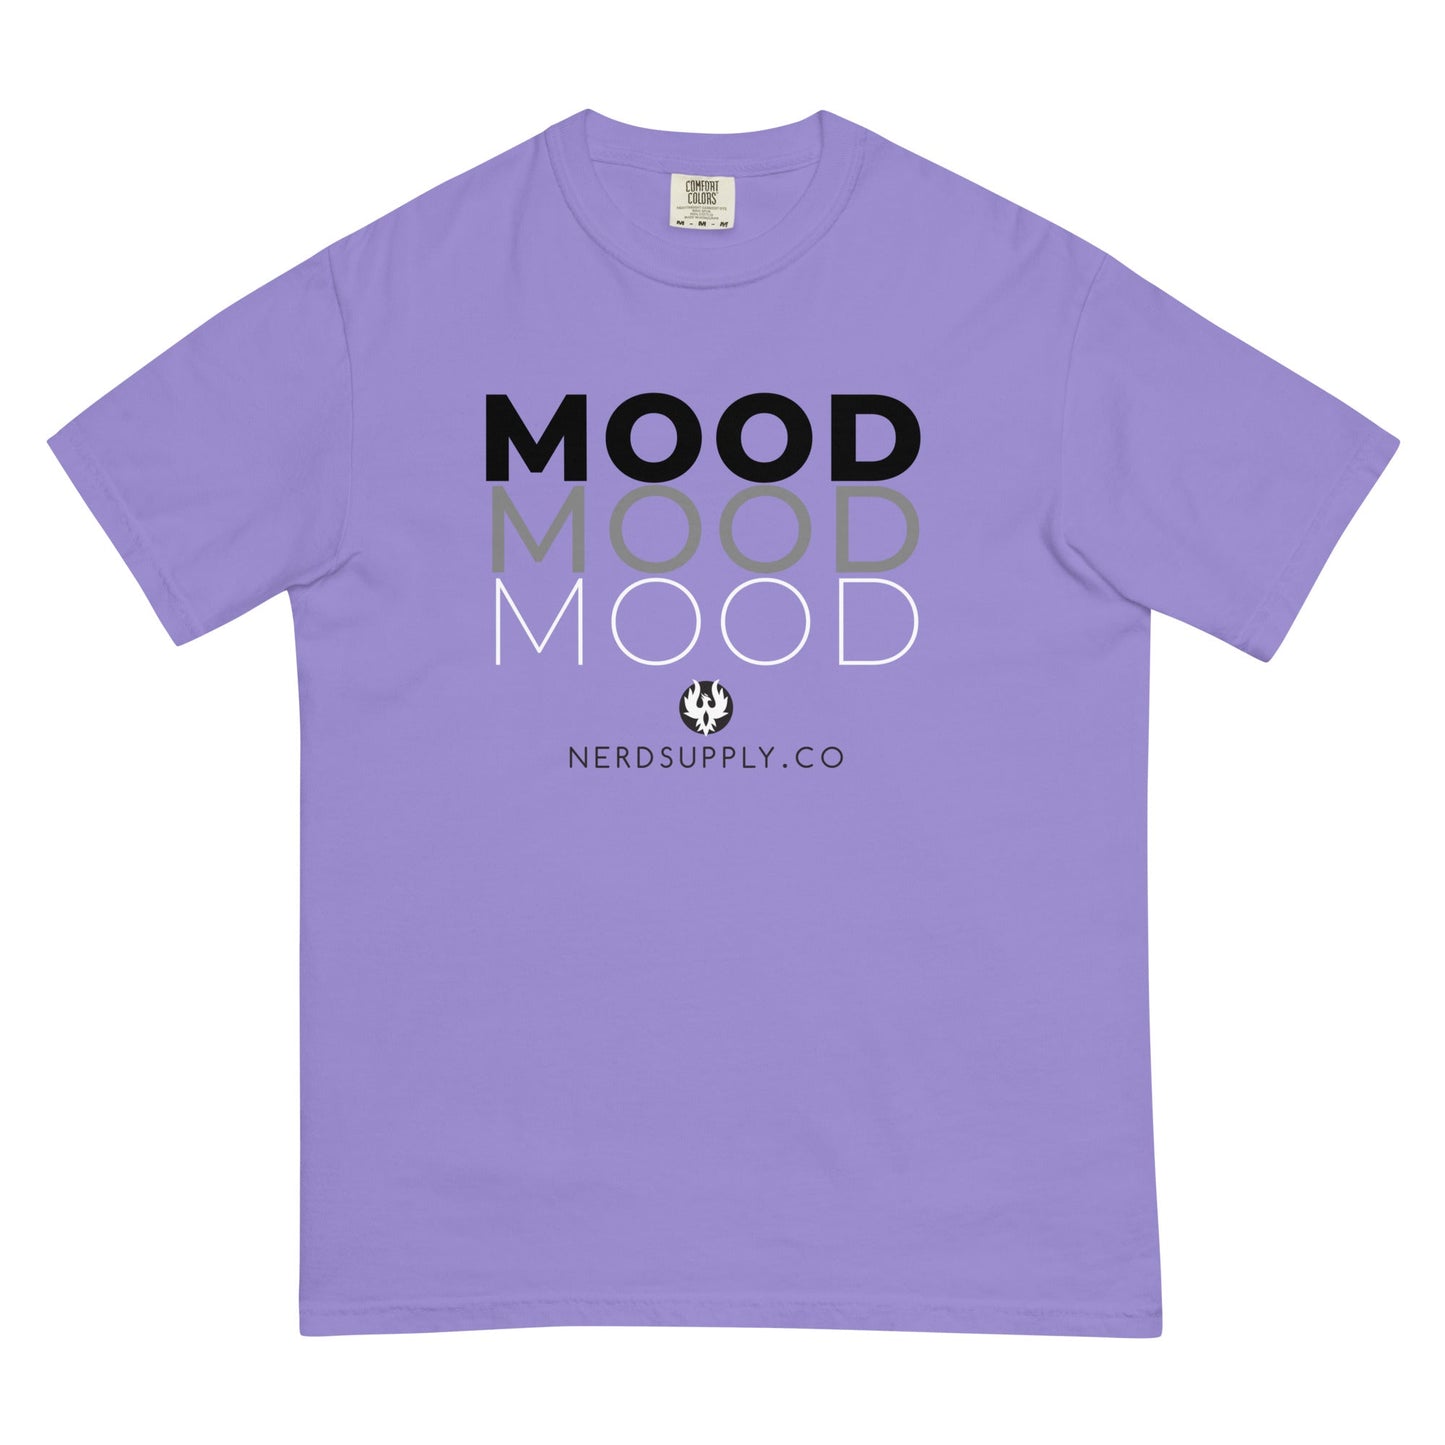 "MOOD" in monochrome t-shirt - The Nerd Supply Company